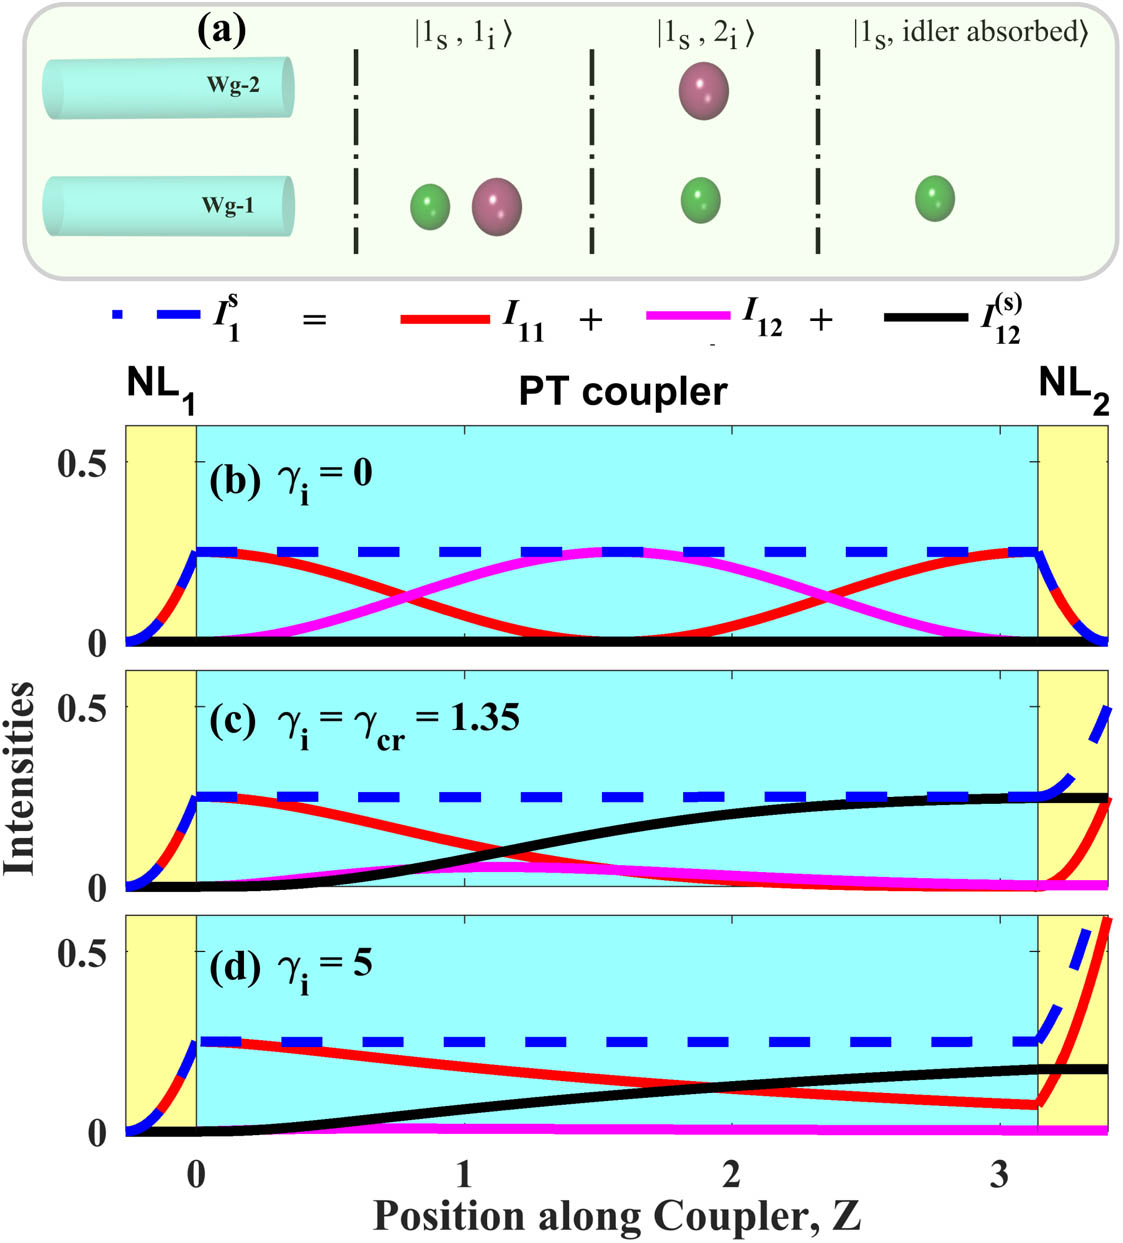 (a) Top panel shows waveguides in which signal and idler photons are present for the biphoton (I11 & I12) and single photon I12(s) intensity contributions (see text for their description). (b) For lossless PT coupler, biphoton amplitudes from sources NL1 and NL2 interfere destructively. (c) At the critical loss, γi=γcr, pair generation in NL1 and NL2 becomes totally distinguishable and their amplitudes add up incoherently. (d) In the broken PT regime, the nonlinear interferometer exhibits increased indistinguishability and coherence between pair generation amplitudes from the two sources. In (b)–(d), a special coupler design with CiL=π is considered.